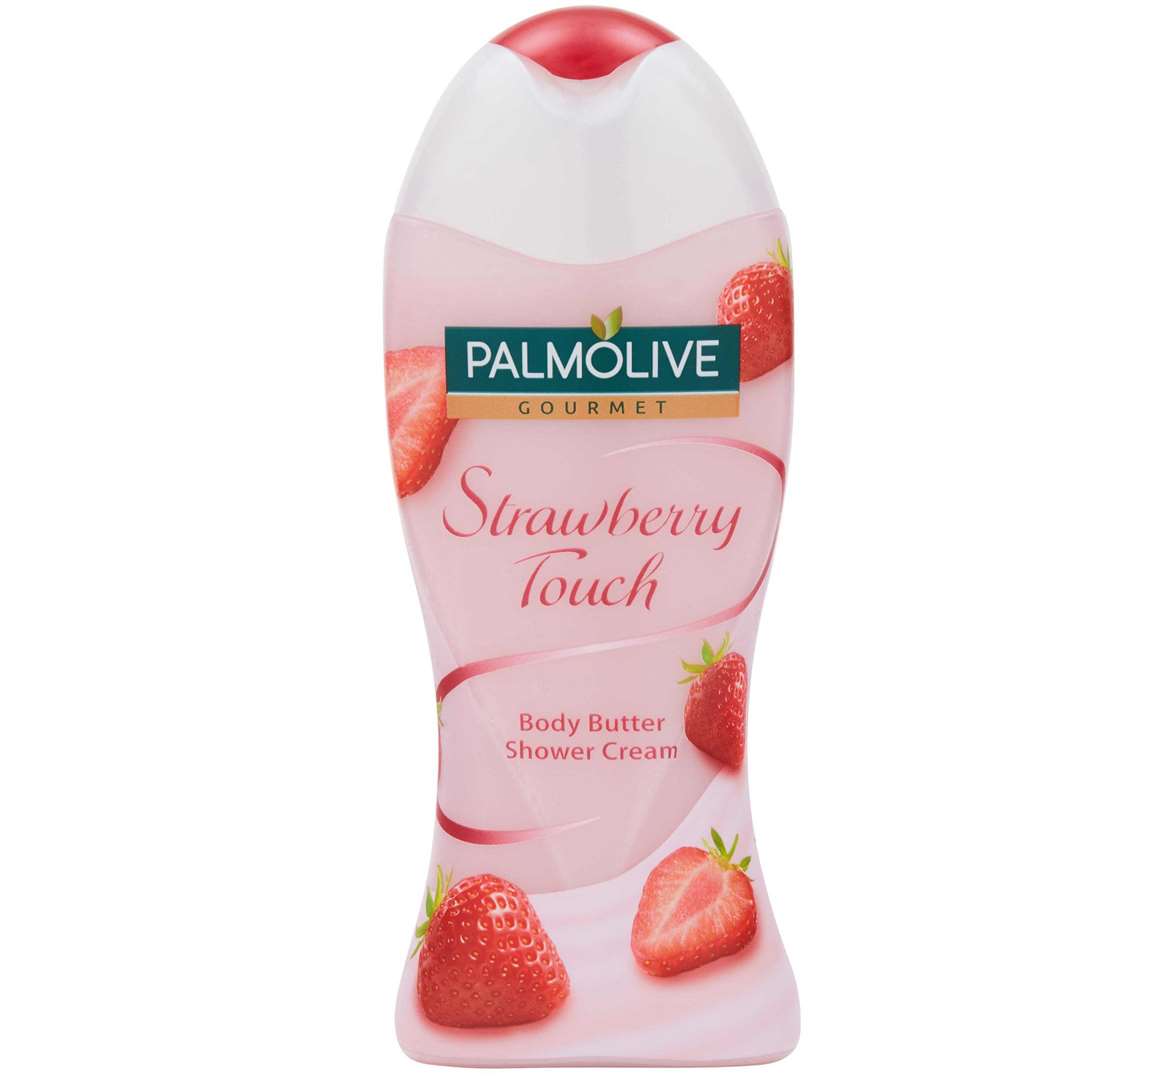 Palmolive Gourmet Strawberry Touch Body Butter Shower Cream